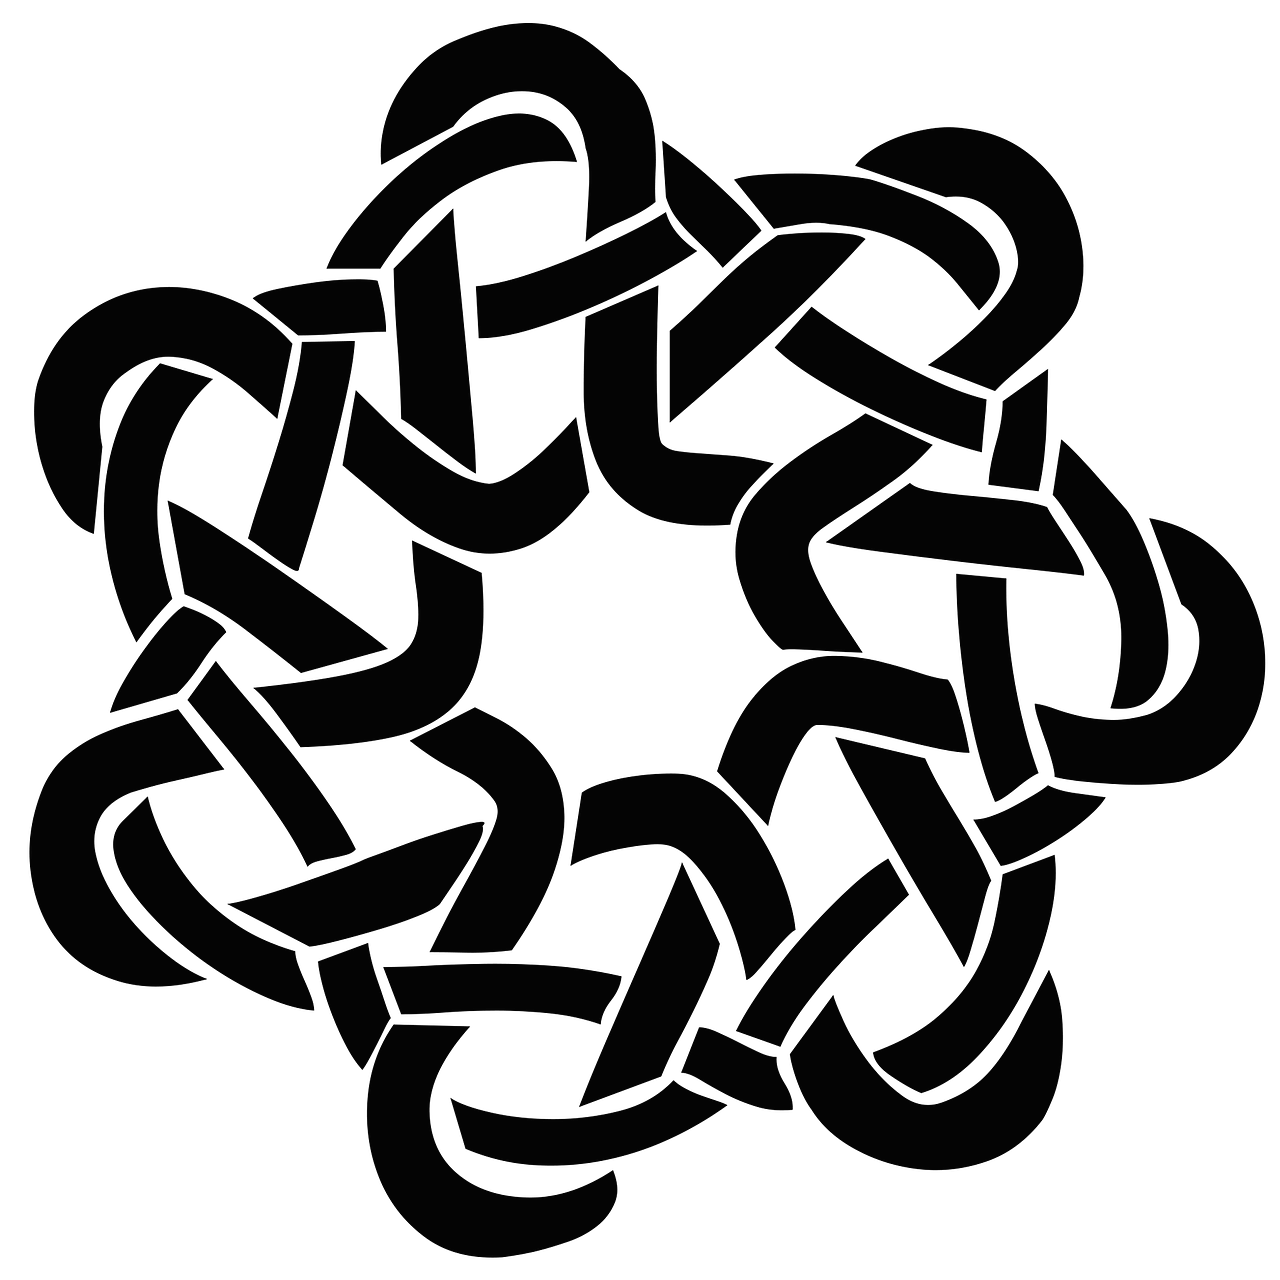 celtic knot silhouette free photo